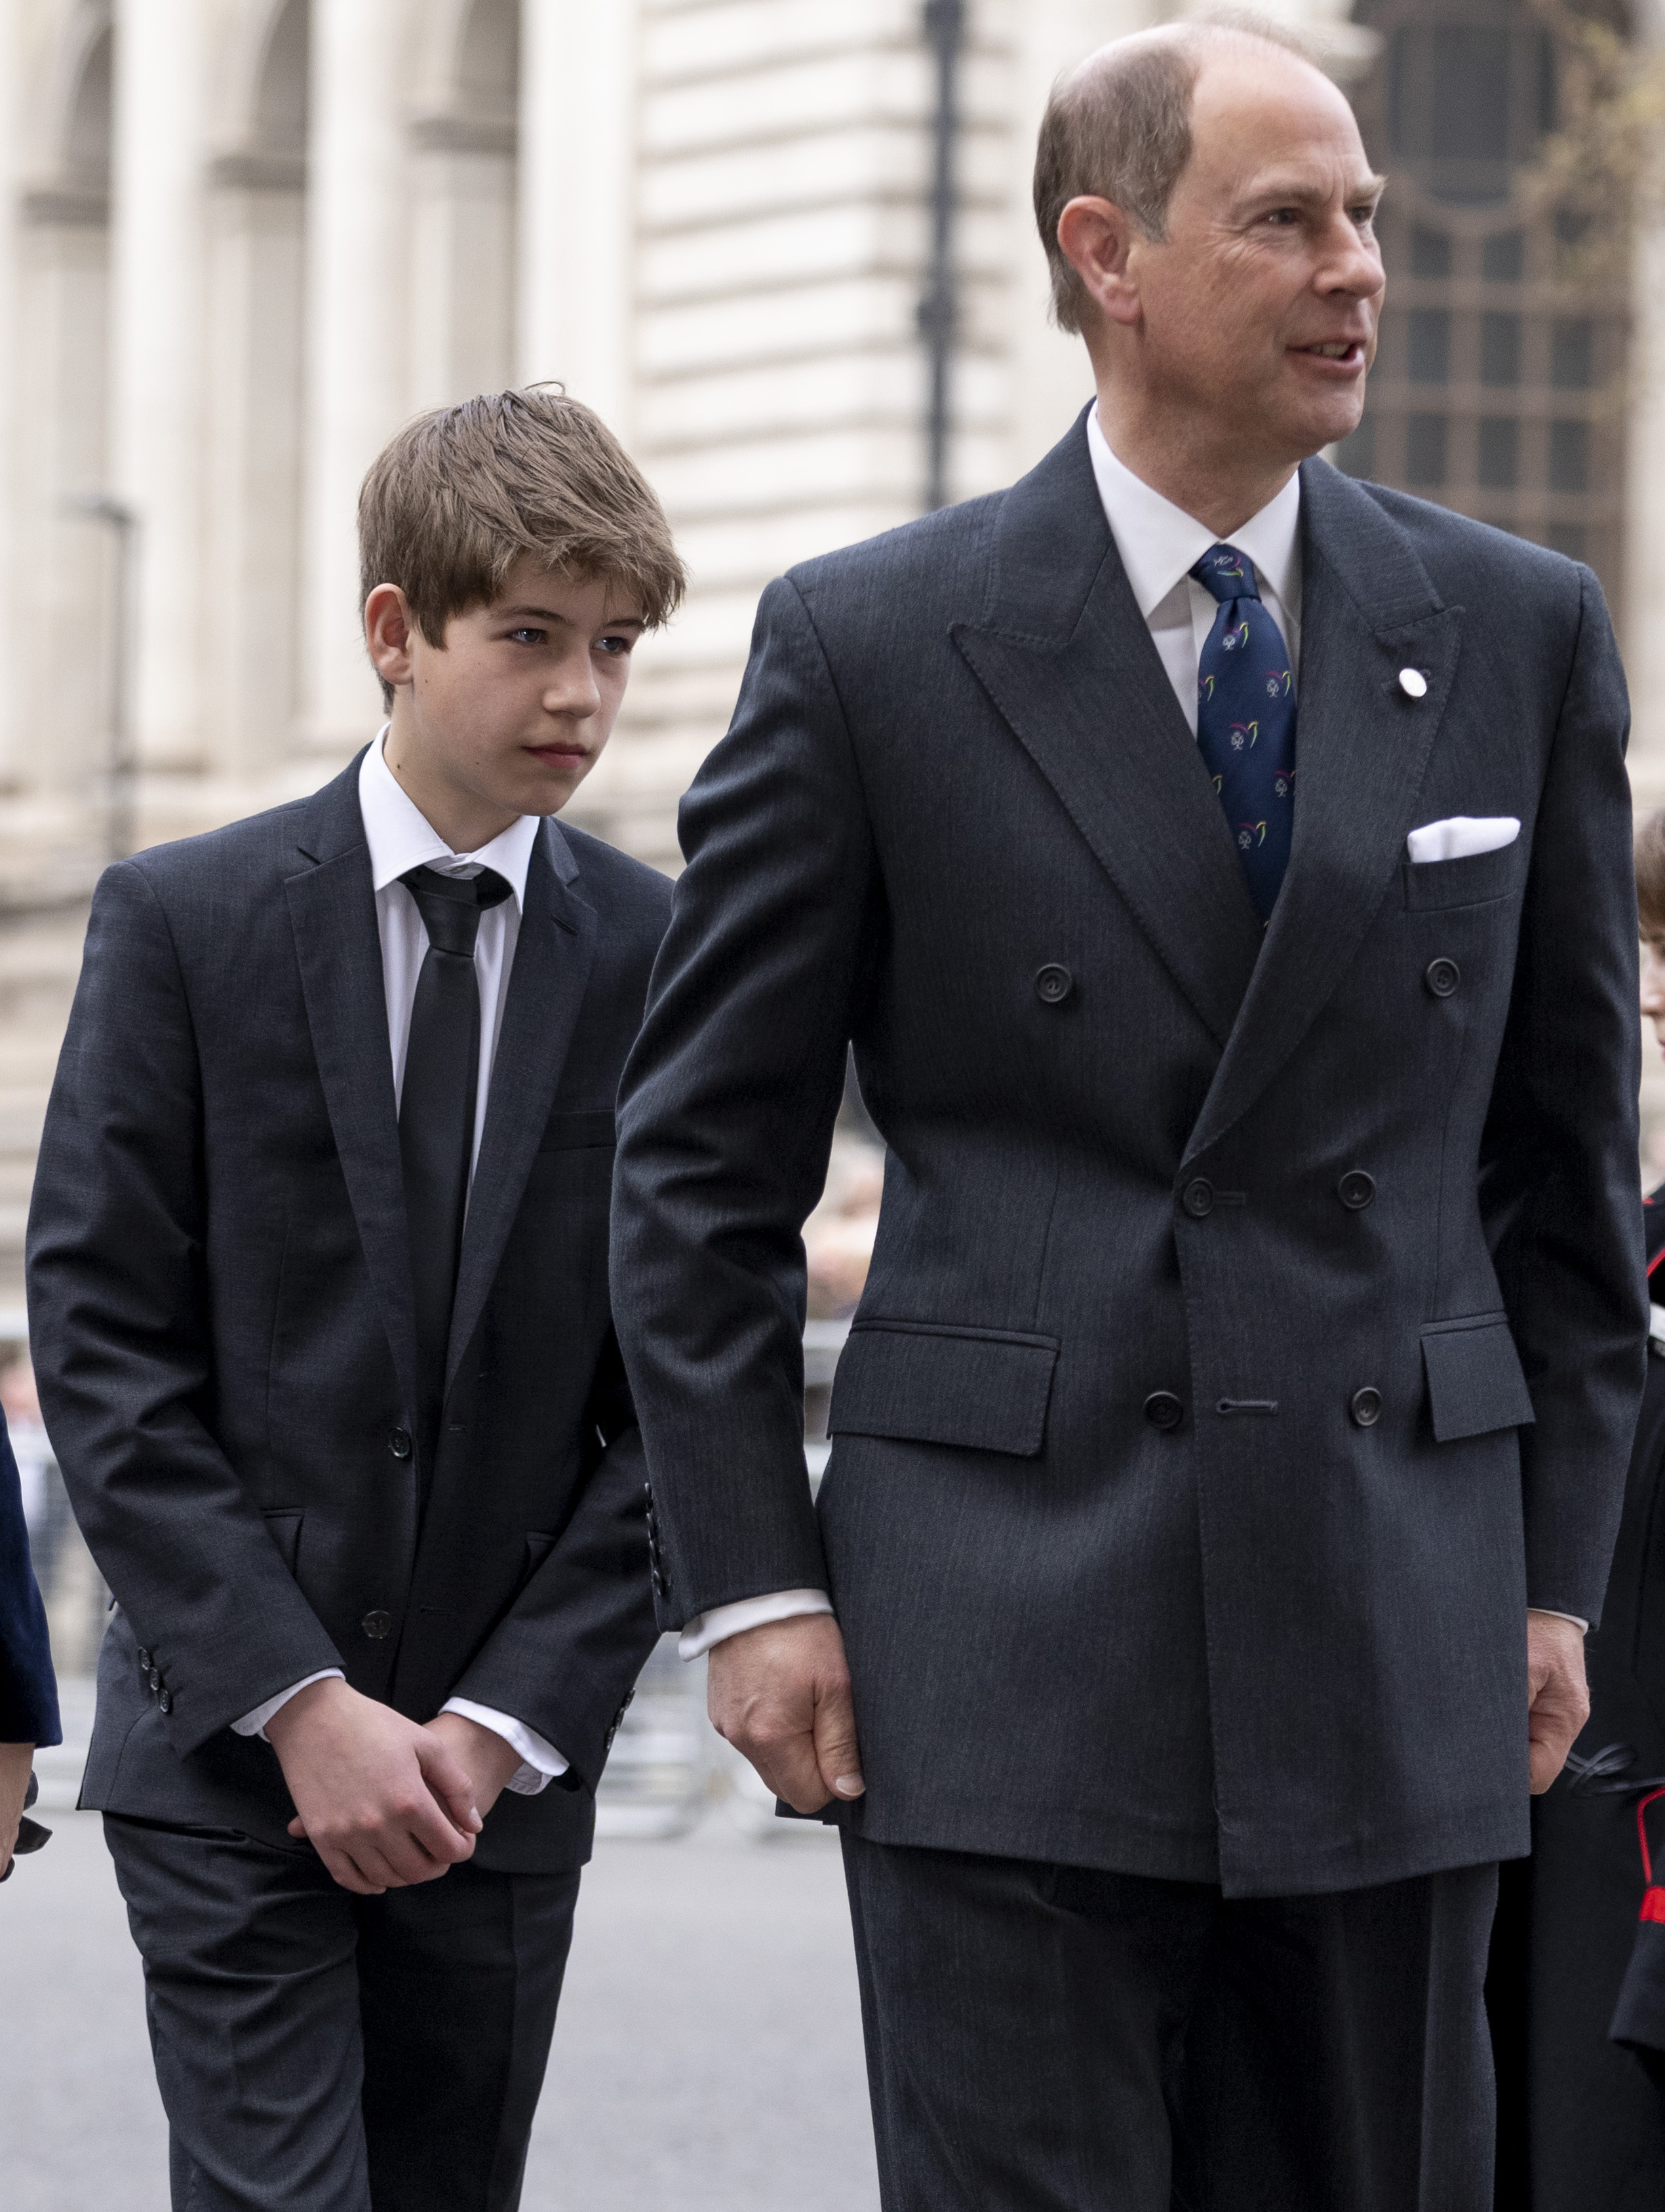 <p>Coming in at No. 15 in line for the throne? The son of Prince Edward, Duke of Edinburgh's son. He was known as James, Viscount Severn, until shortly after he turned 15. In March 2023, James assumed his father's previous title, Earl of Wessex, after Edward was made Duke of Edinburgh. Although James is technically the youngest child in his family, he snagged a higher place on the list than his big sister, Lady Louise Mountbatten-Windsor, due to the archaic (and now defunct) rule that favored male over female heirs. Although the rules have changed, they only impact children born after 2011.</p>